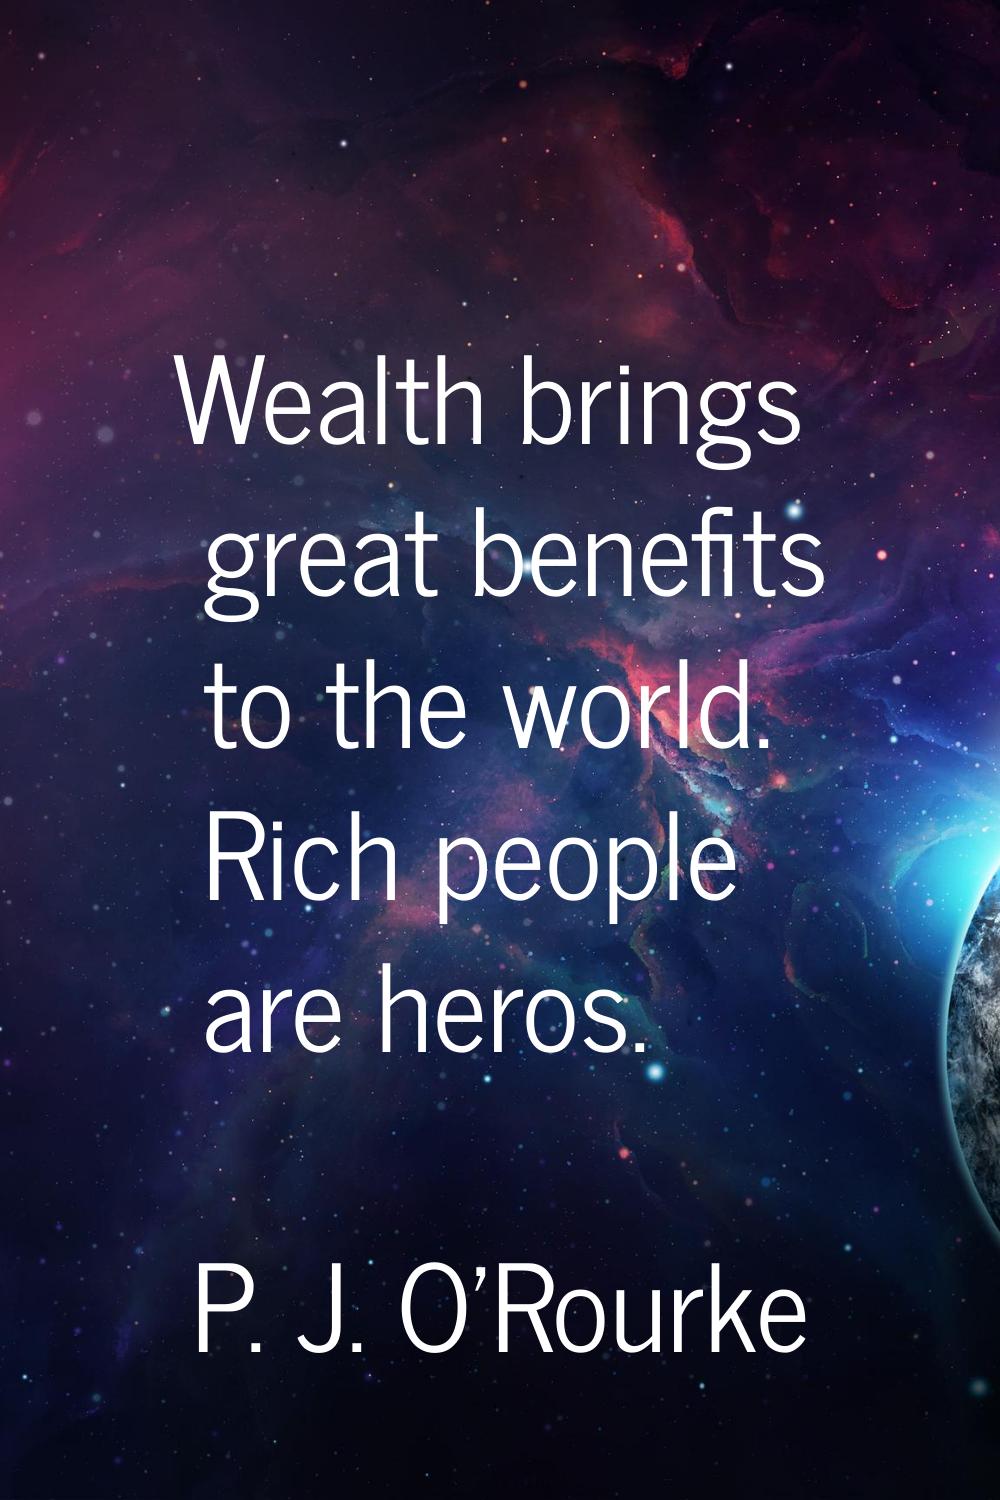 Wealth brings great benefits to the world. Rich people are heros.